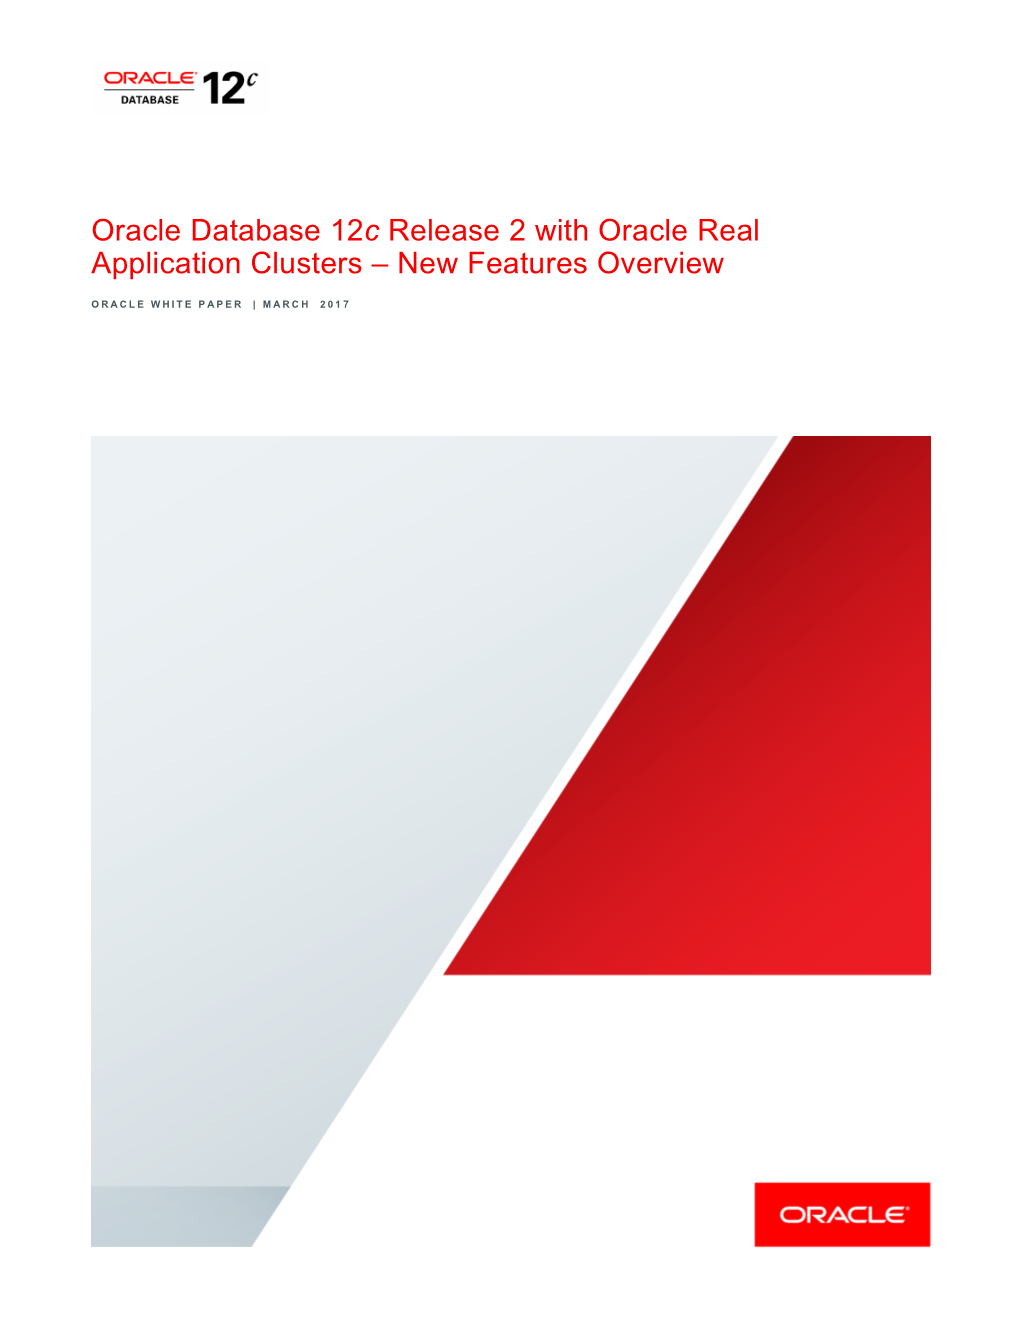 Oracle Database 12C Release 2 with Oracle Real Application Clusters – New Features Overview